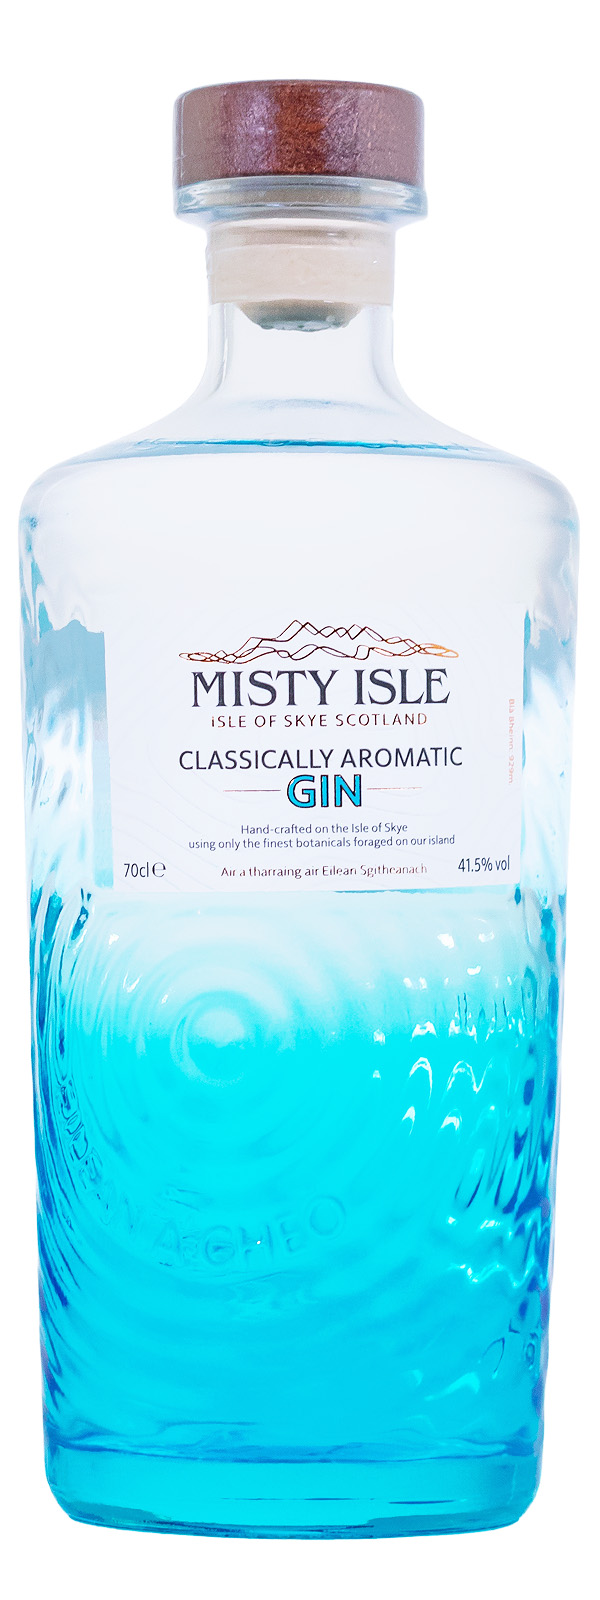 Misty Isle Gin Classically Aromatic - 0,7L 41,5% vol